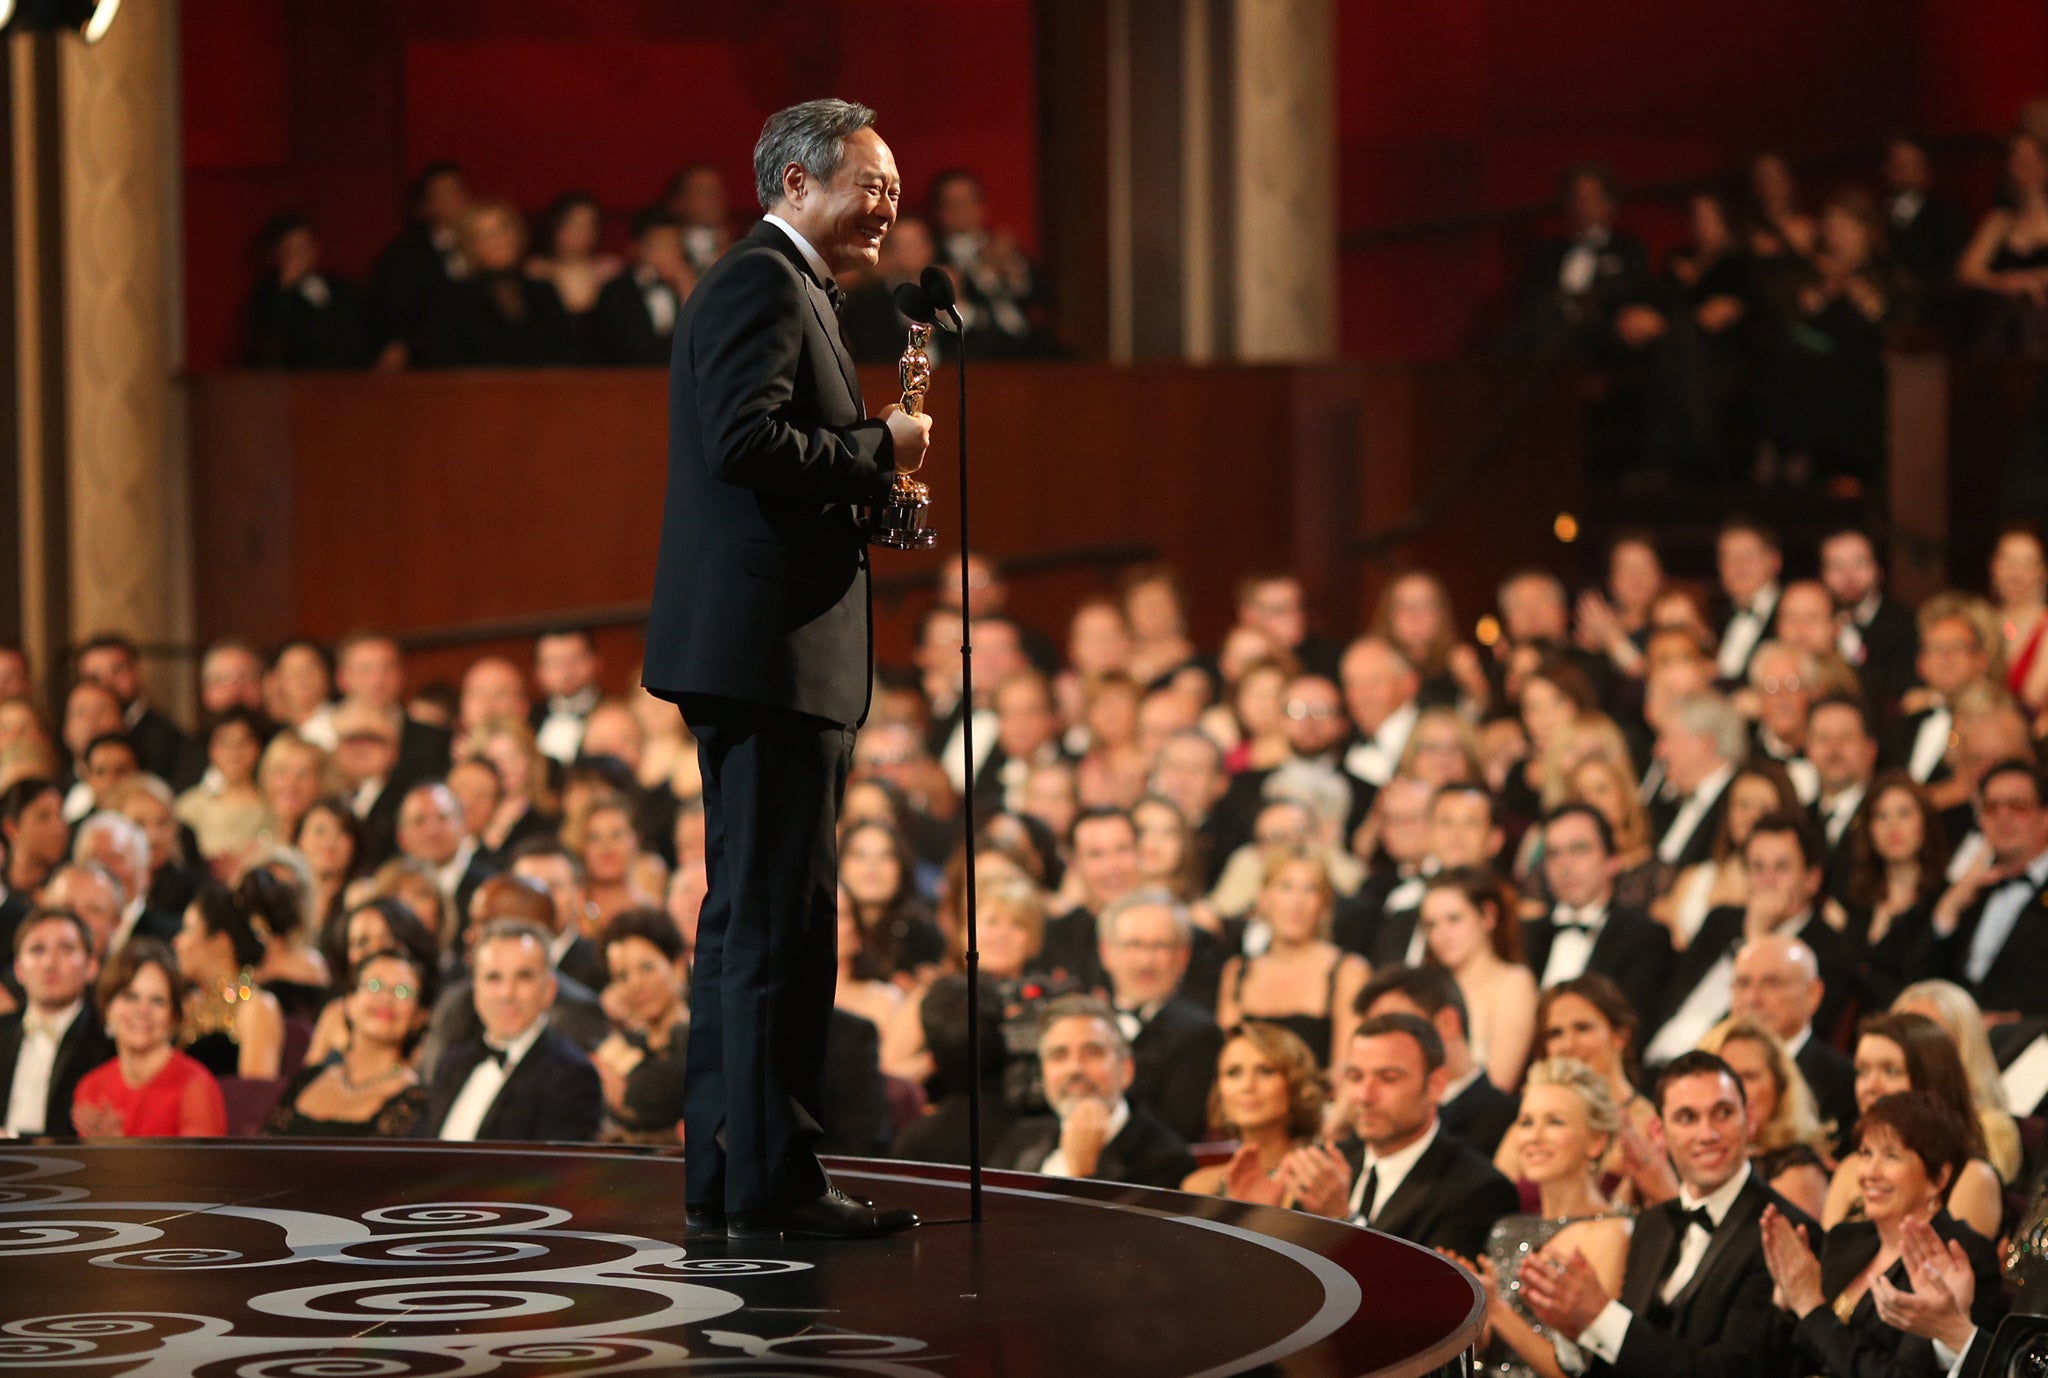 Ang Lee accepts his Oscar for best director (Life of Pi)